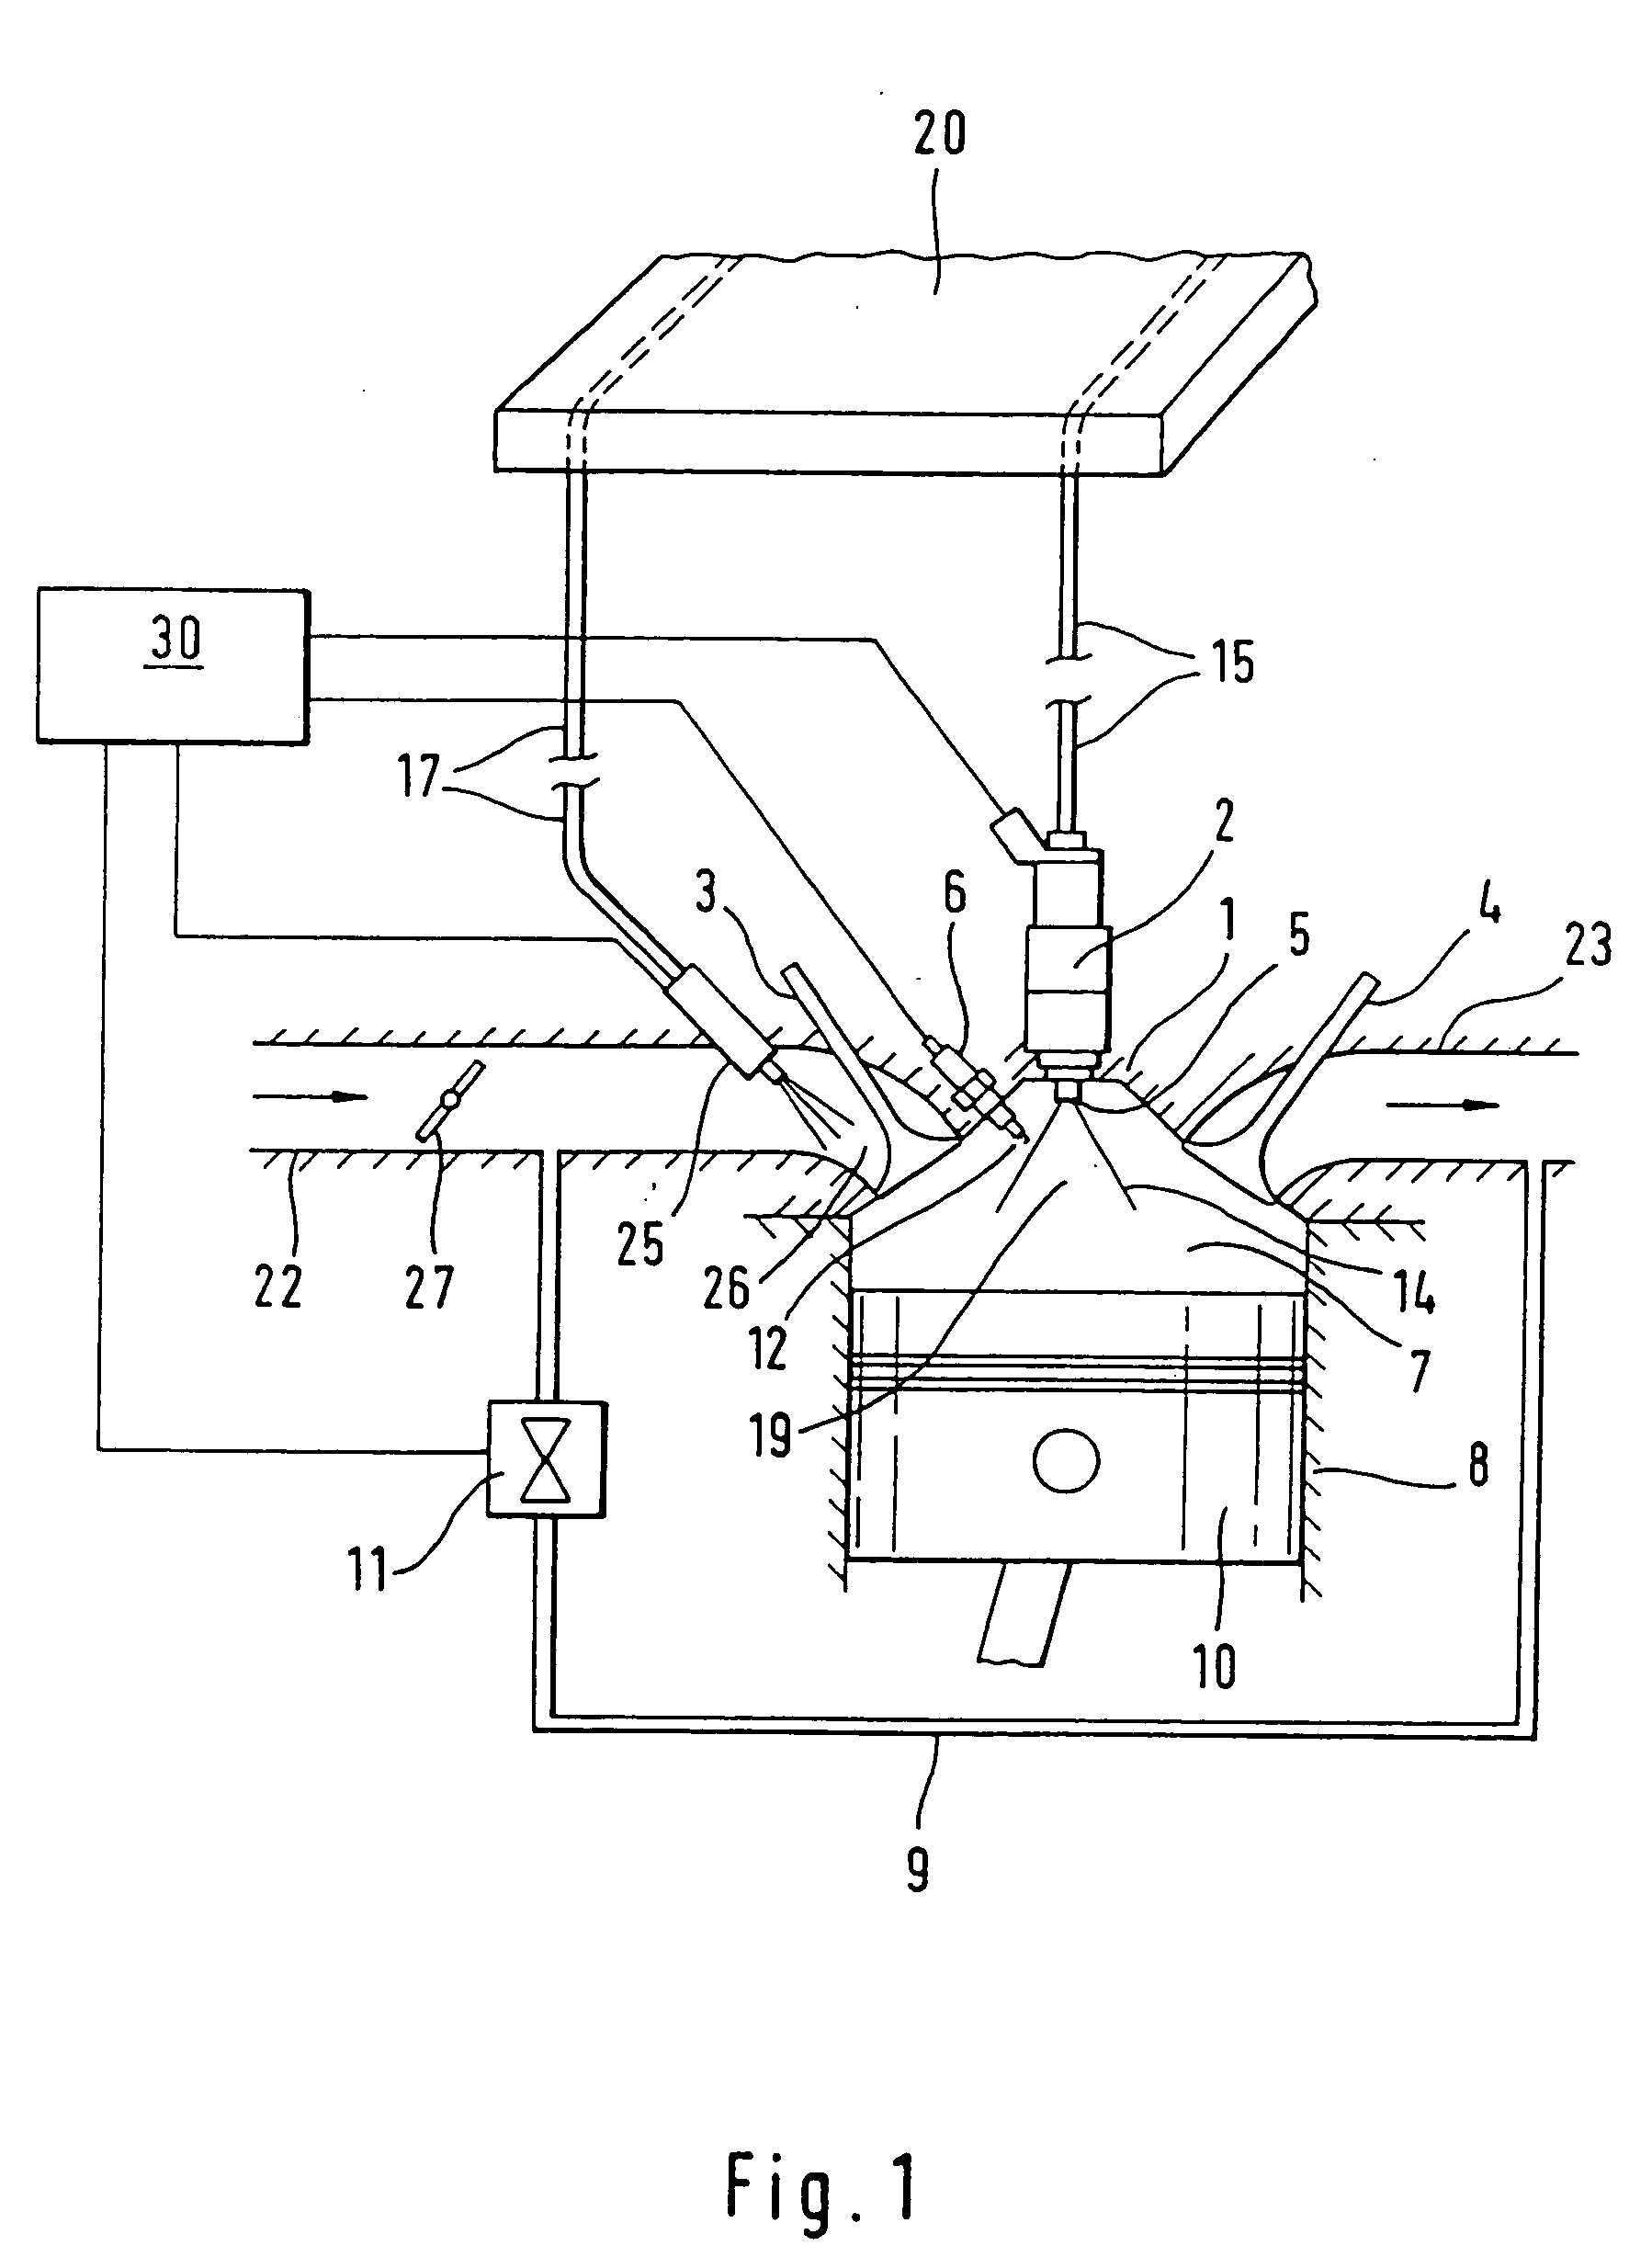 Method of operating a spark-ignition internal combustion engine